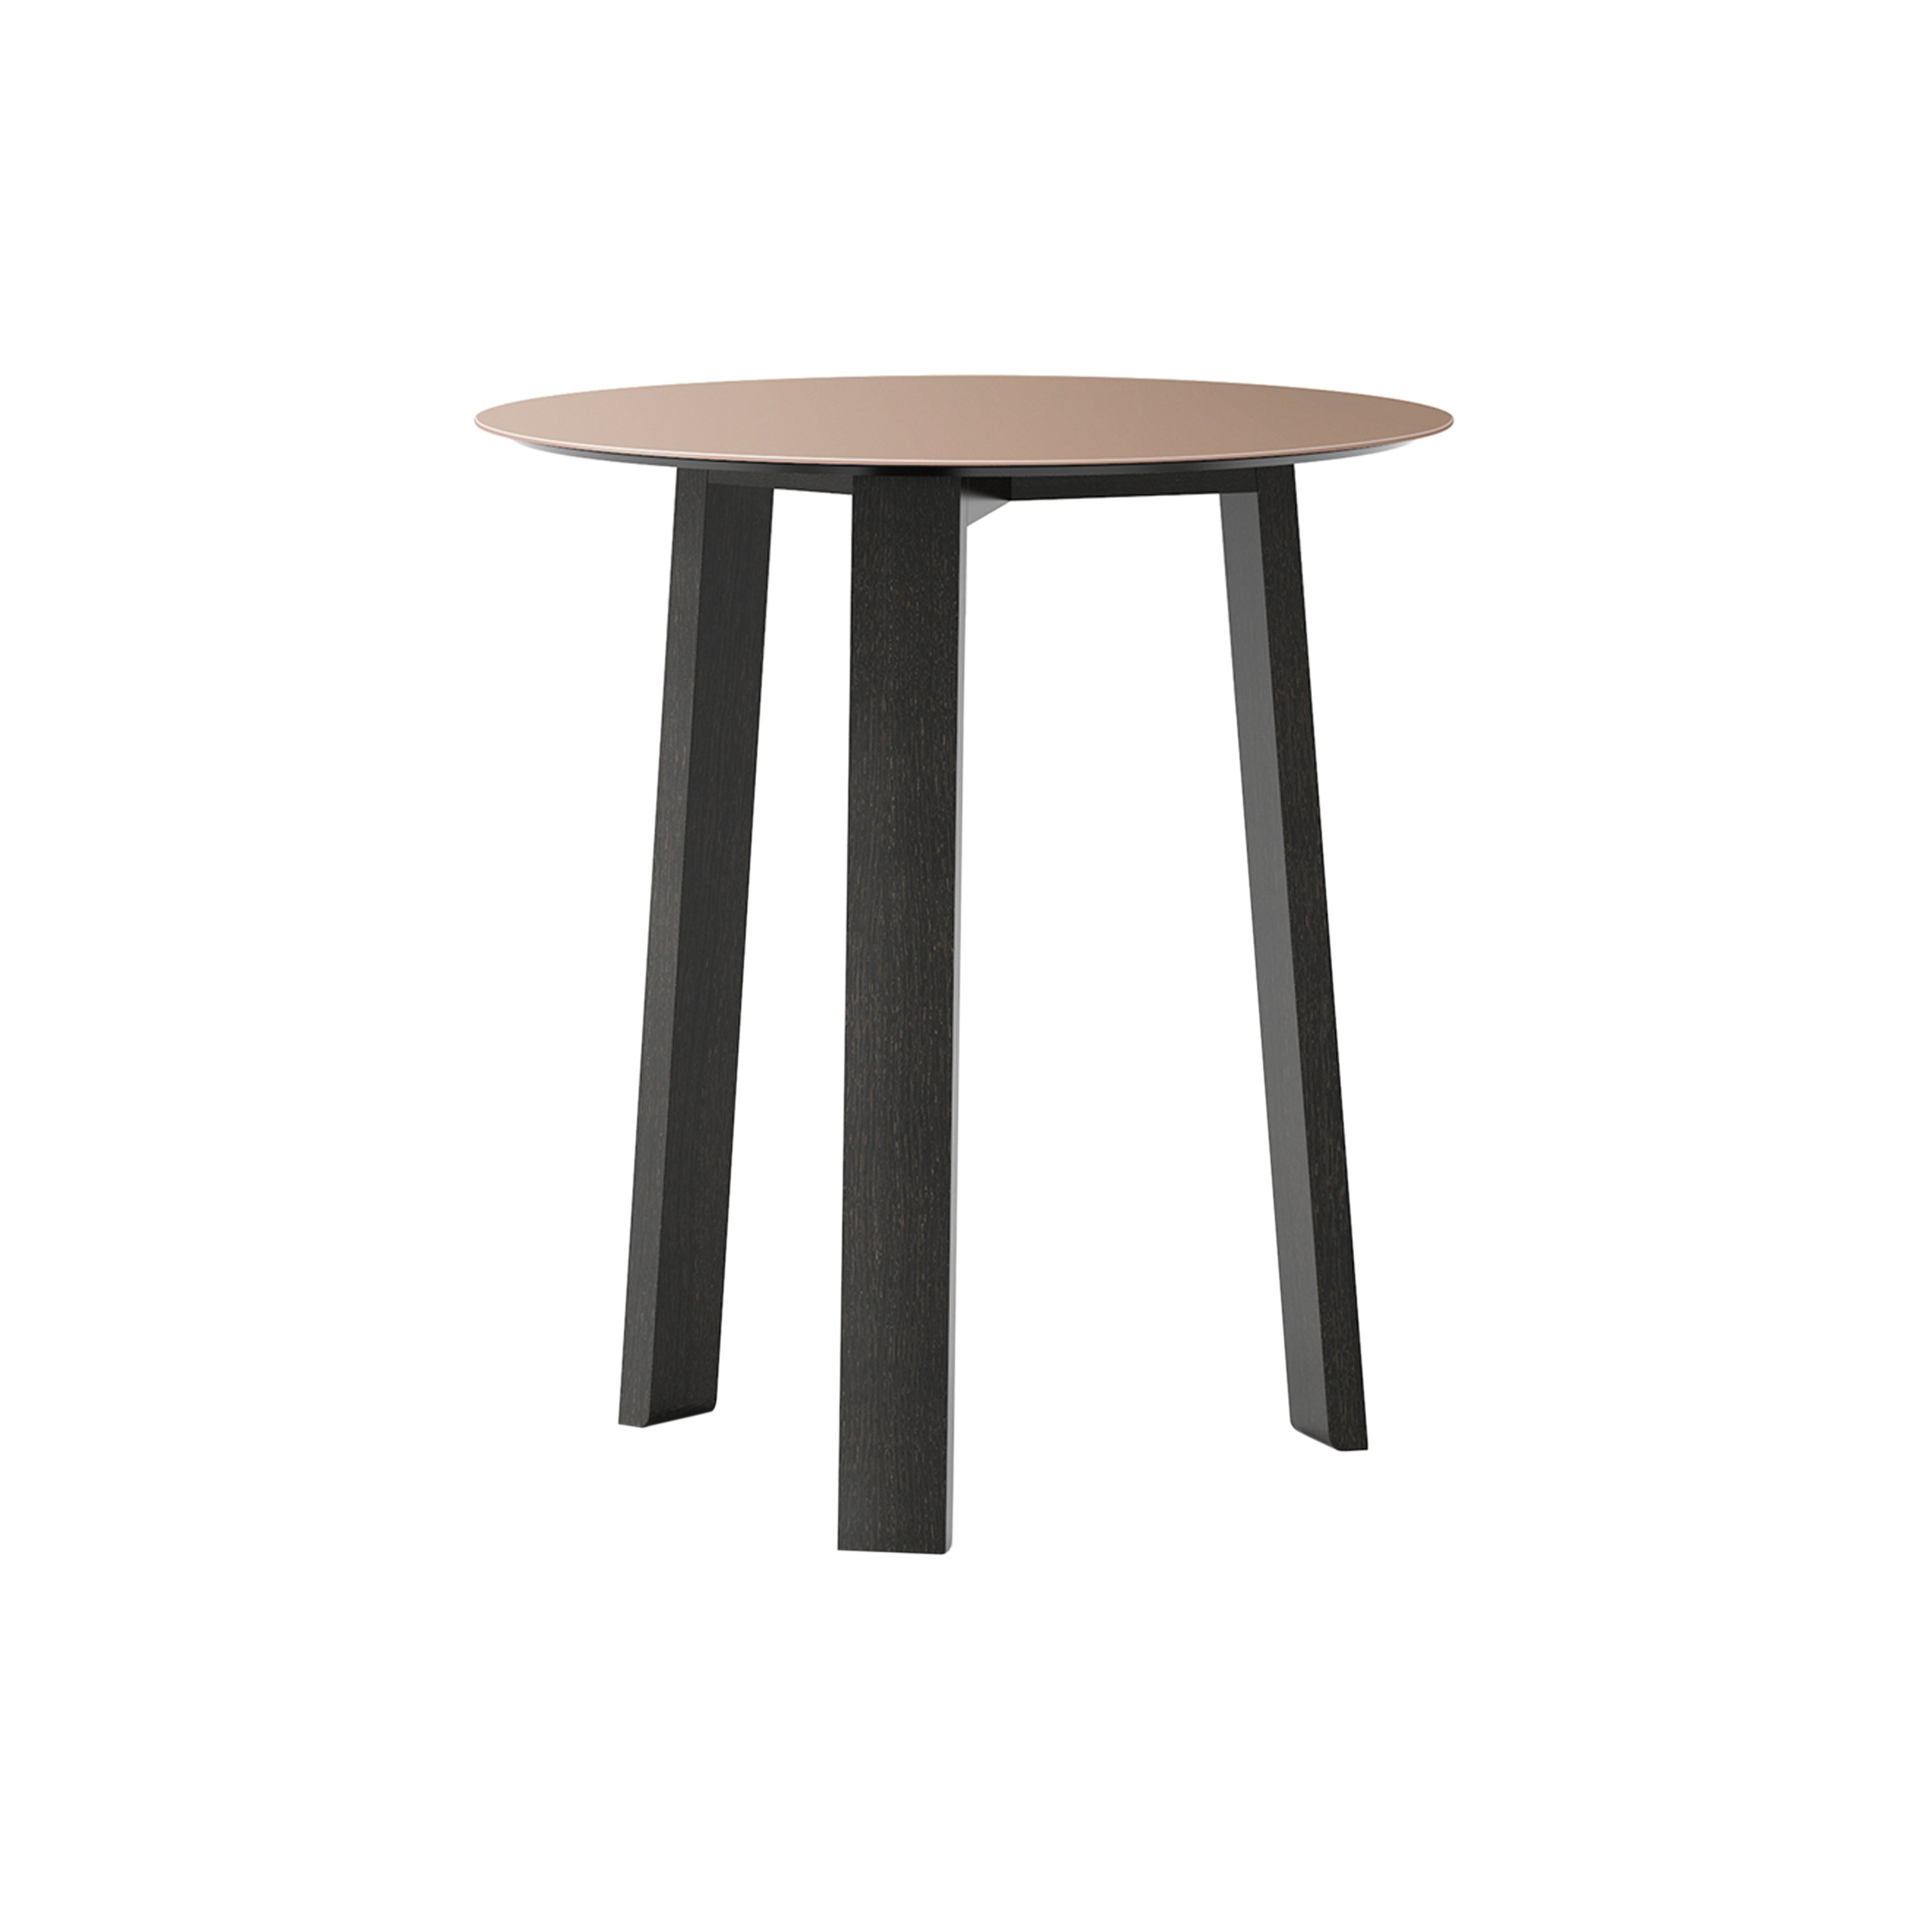 Stockholm Round Side Table: High + Pale Rose Anodised Aluminum + Dark Grey Stained Oak